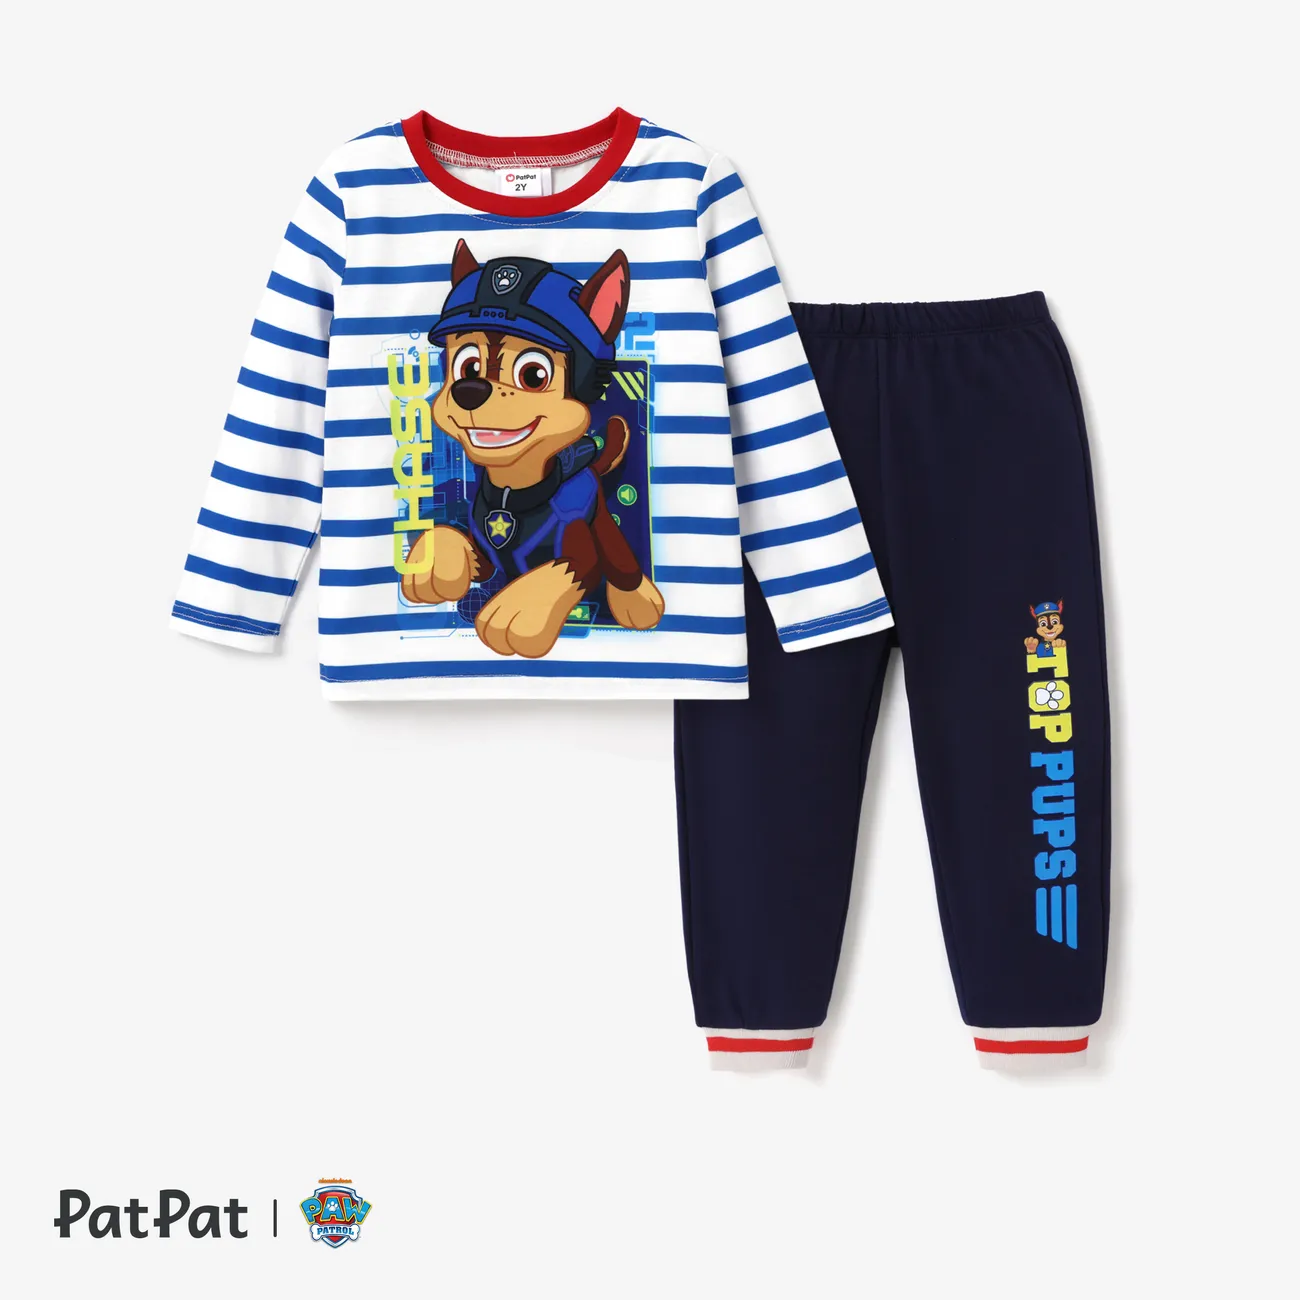 PAW Patrol Toddler Boy Embroidered Character Jacket or Sweatshirt and Pants Set  Multi-color big image 1